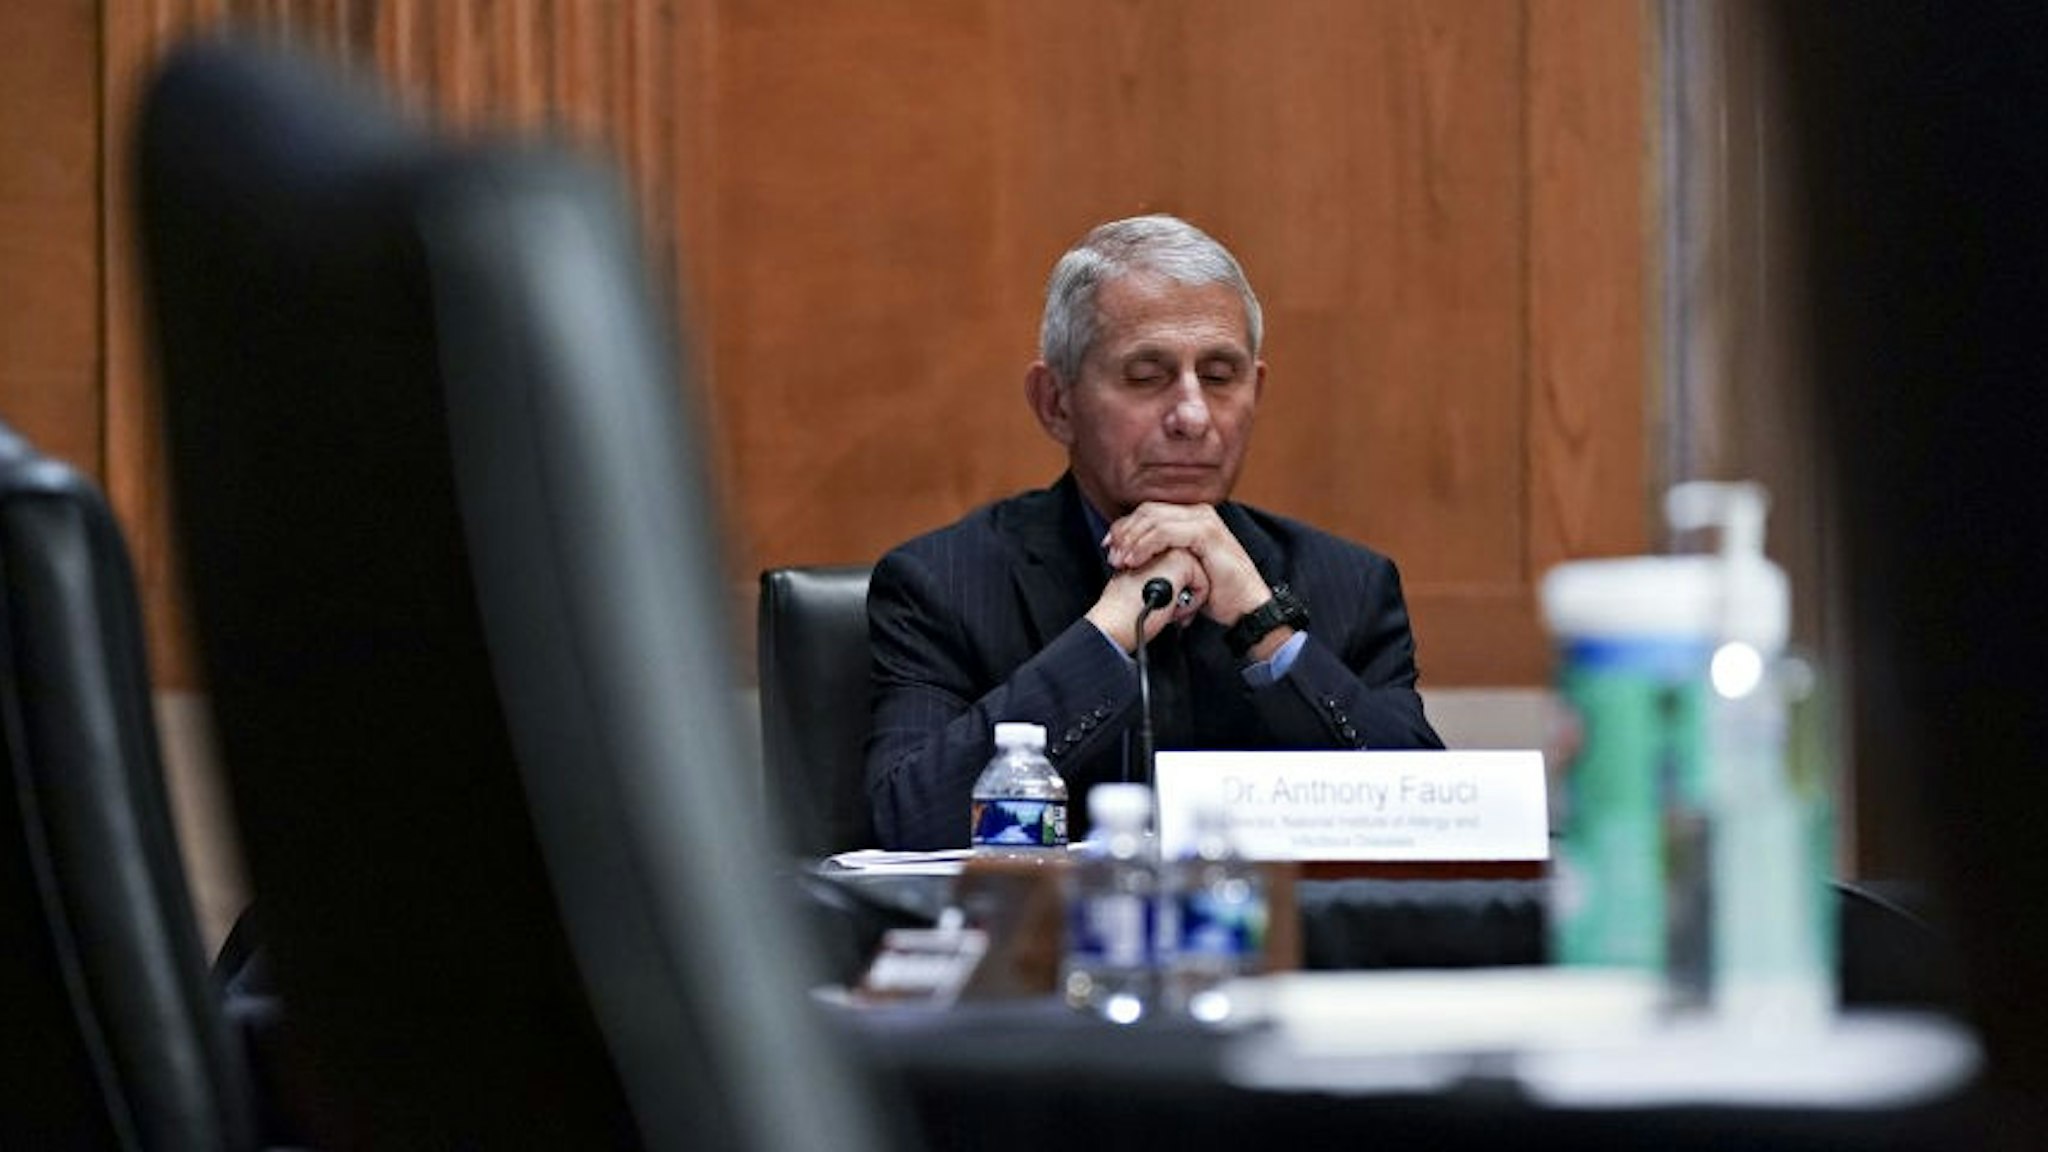 Anthony Fauci, director of the National Institute of Allergy and Infectious Diseases, waits to begin a Senate Appropriations Subcommittee hearing in Washington, D.C., U.S., on Wednesday, May 26, 2021. The hearing is titled "National Institutes of Health's FY22 Budget and the State of Medical Research." Photographer: